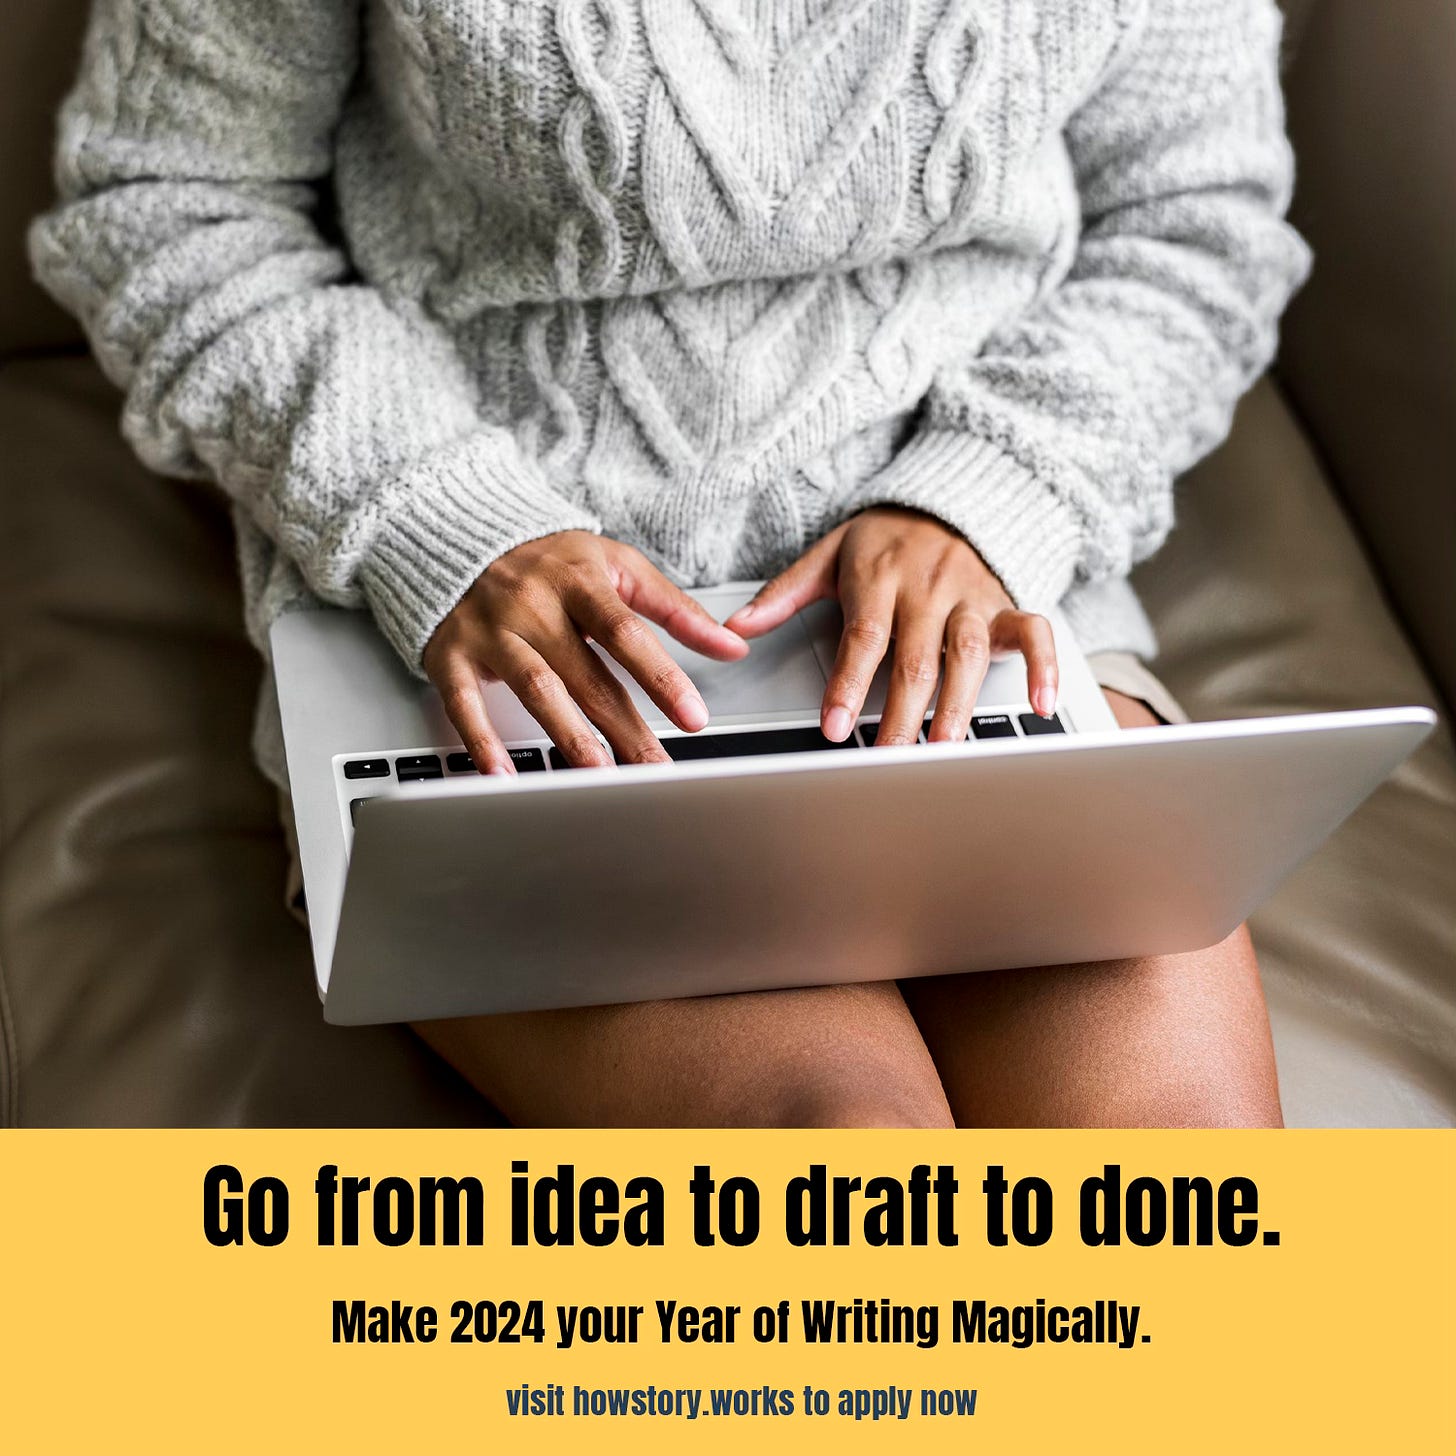 image of a woman writing on a laptop with the text "Go from idea to draft to done - make 2024 your year of writing magically - visit howstory.works to apply now